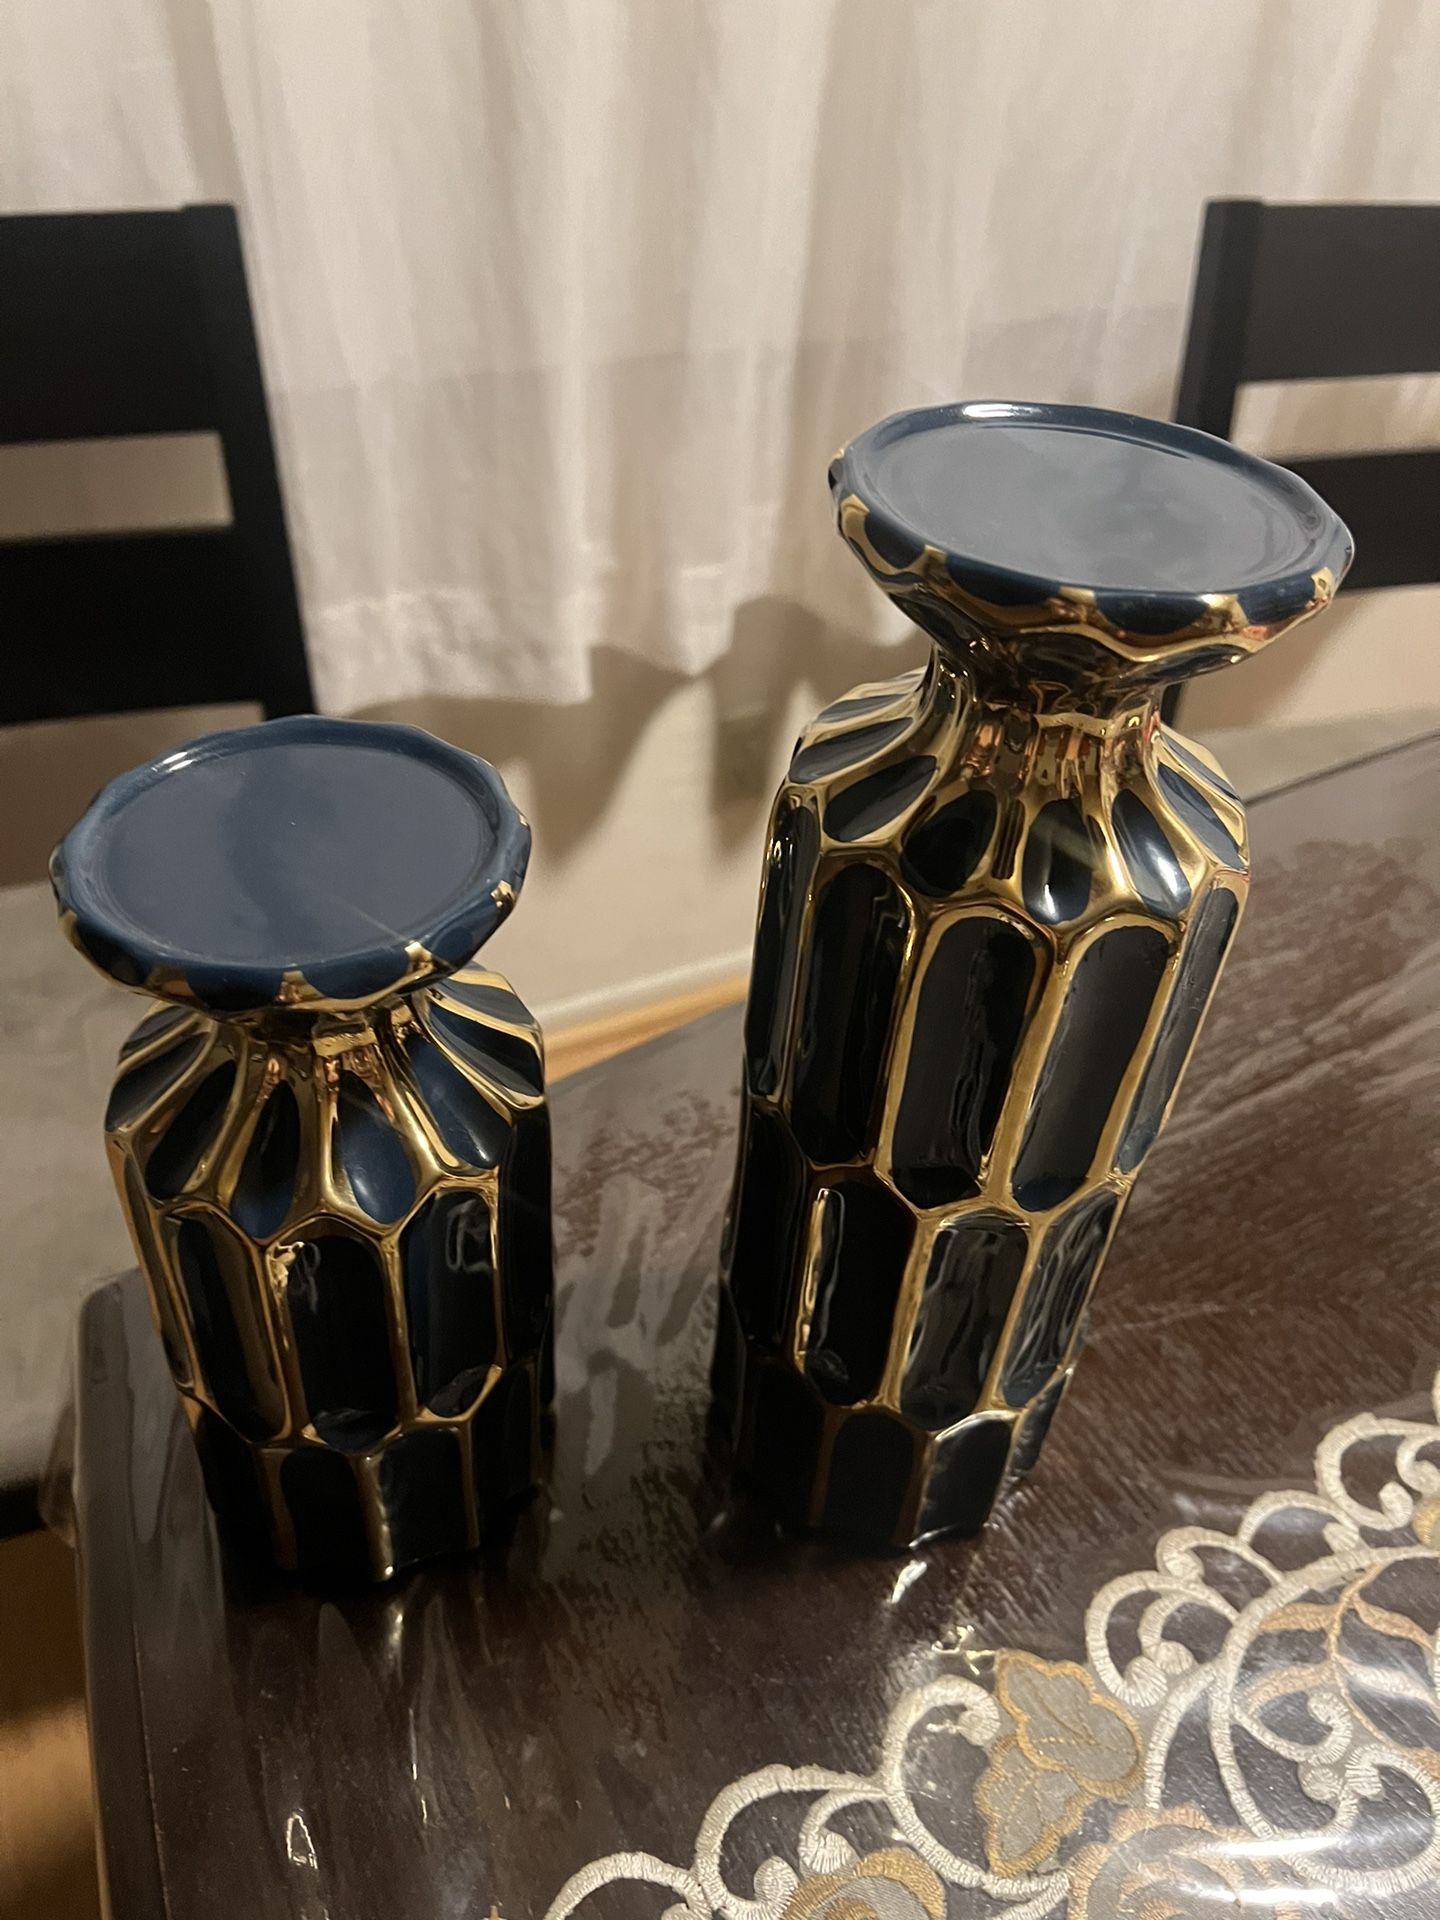 2 Candle Holder $15